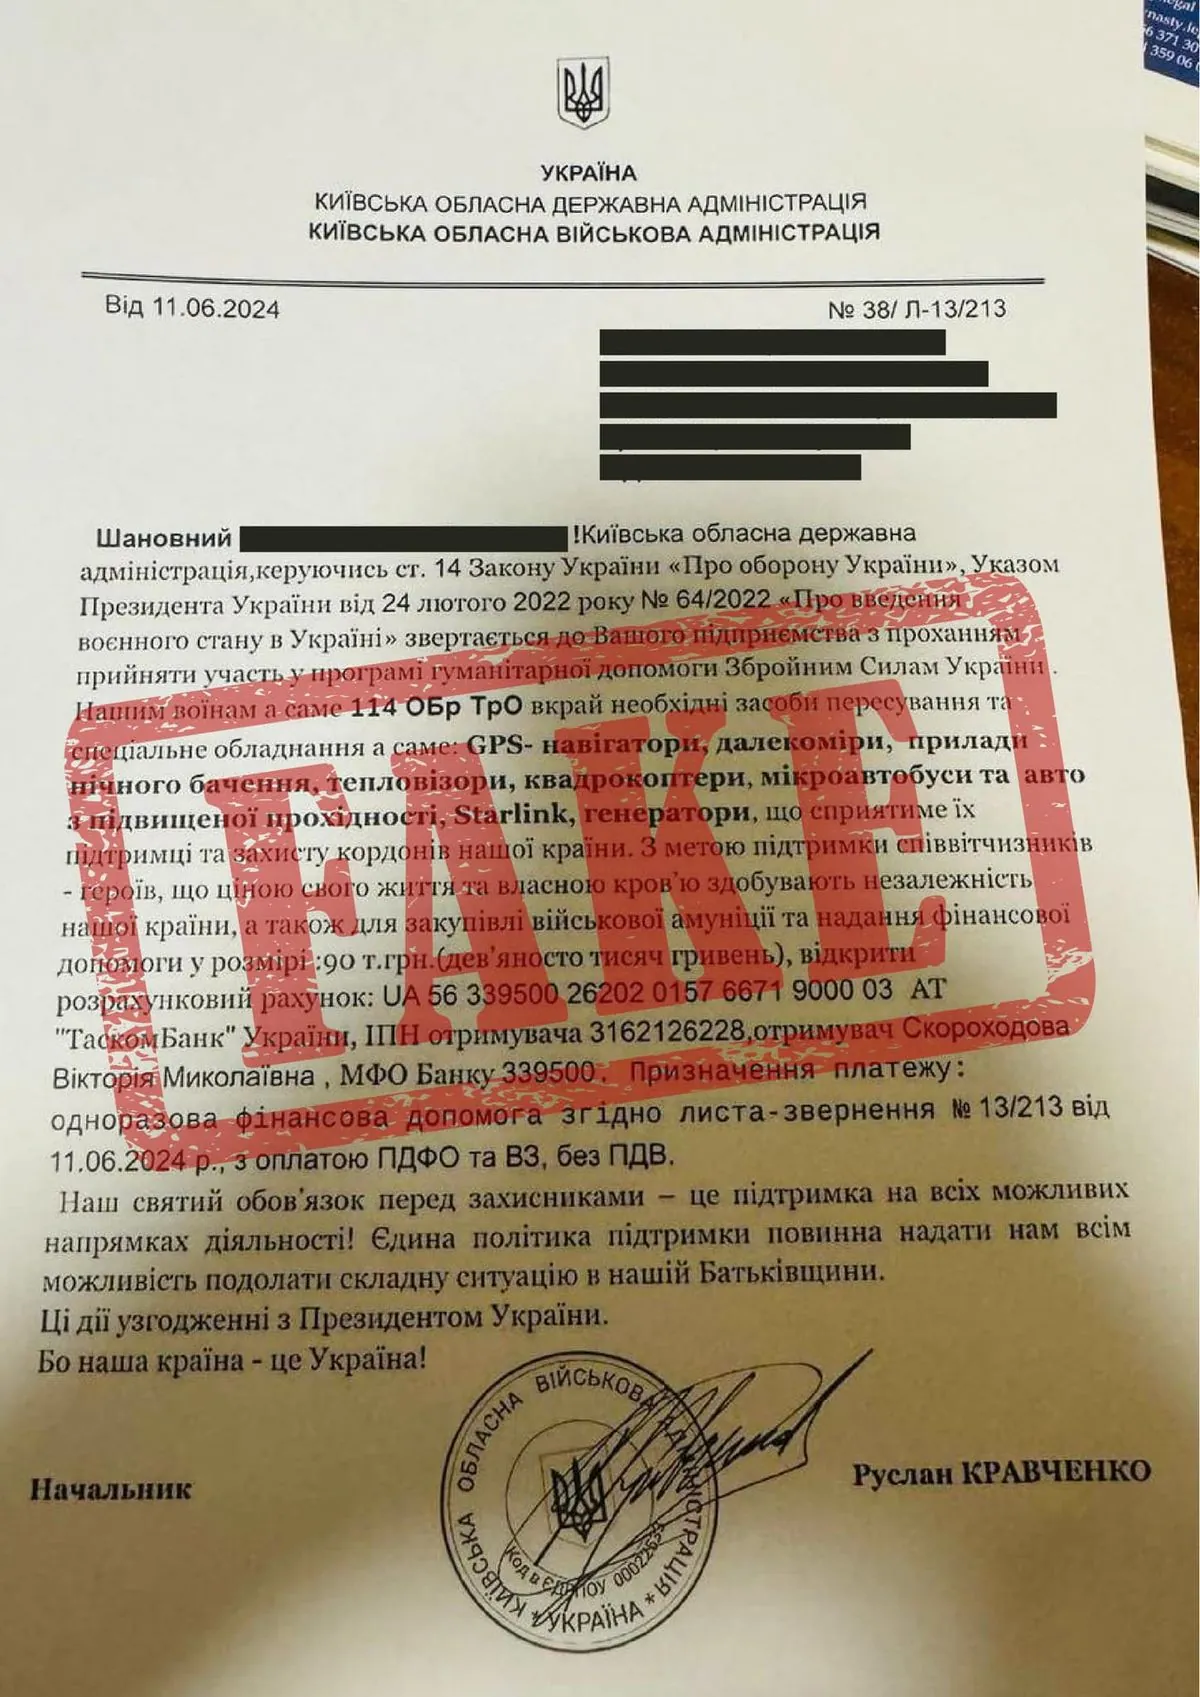 unidentified-persons-send-fake-letters-on-behalf-of-the-head-of-the-kyiv-rma-allegedly-raising-funds-to-help-the-military